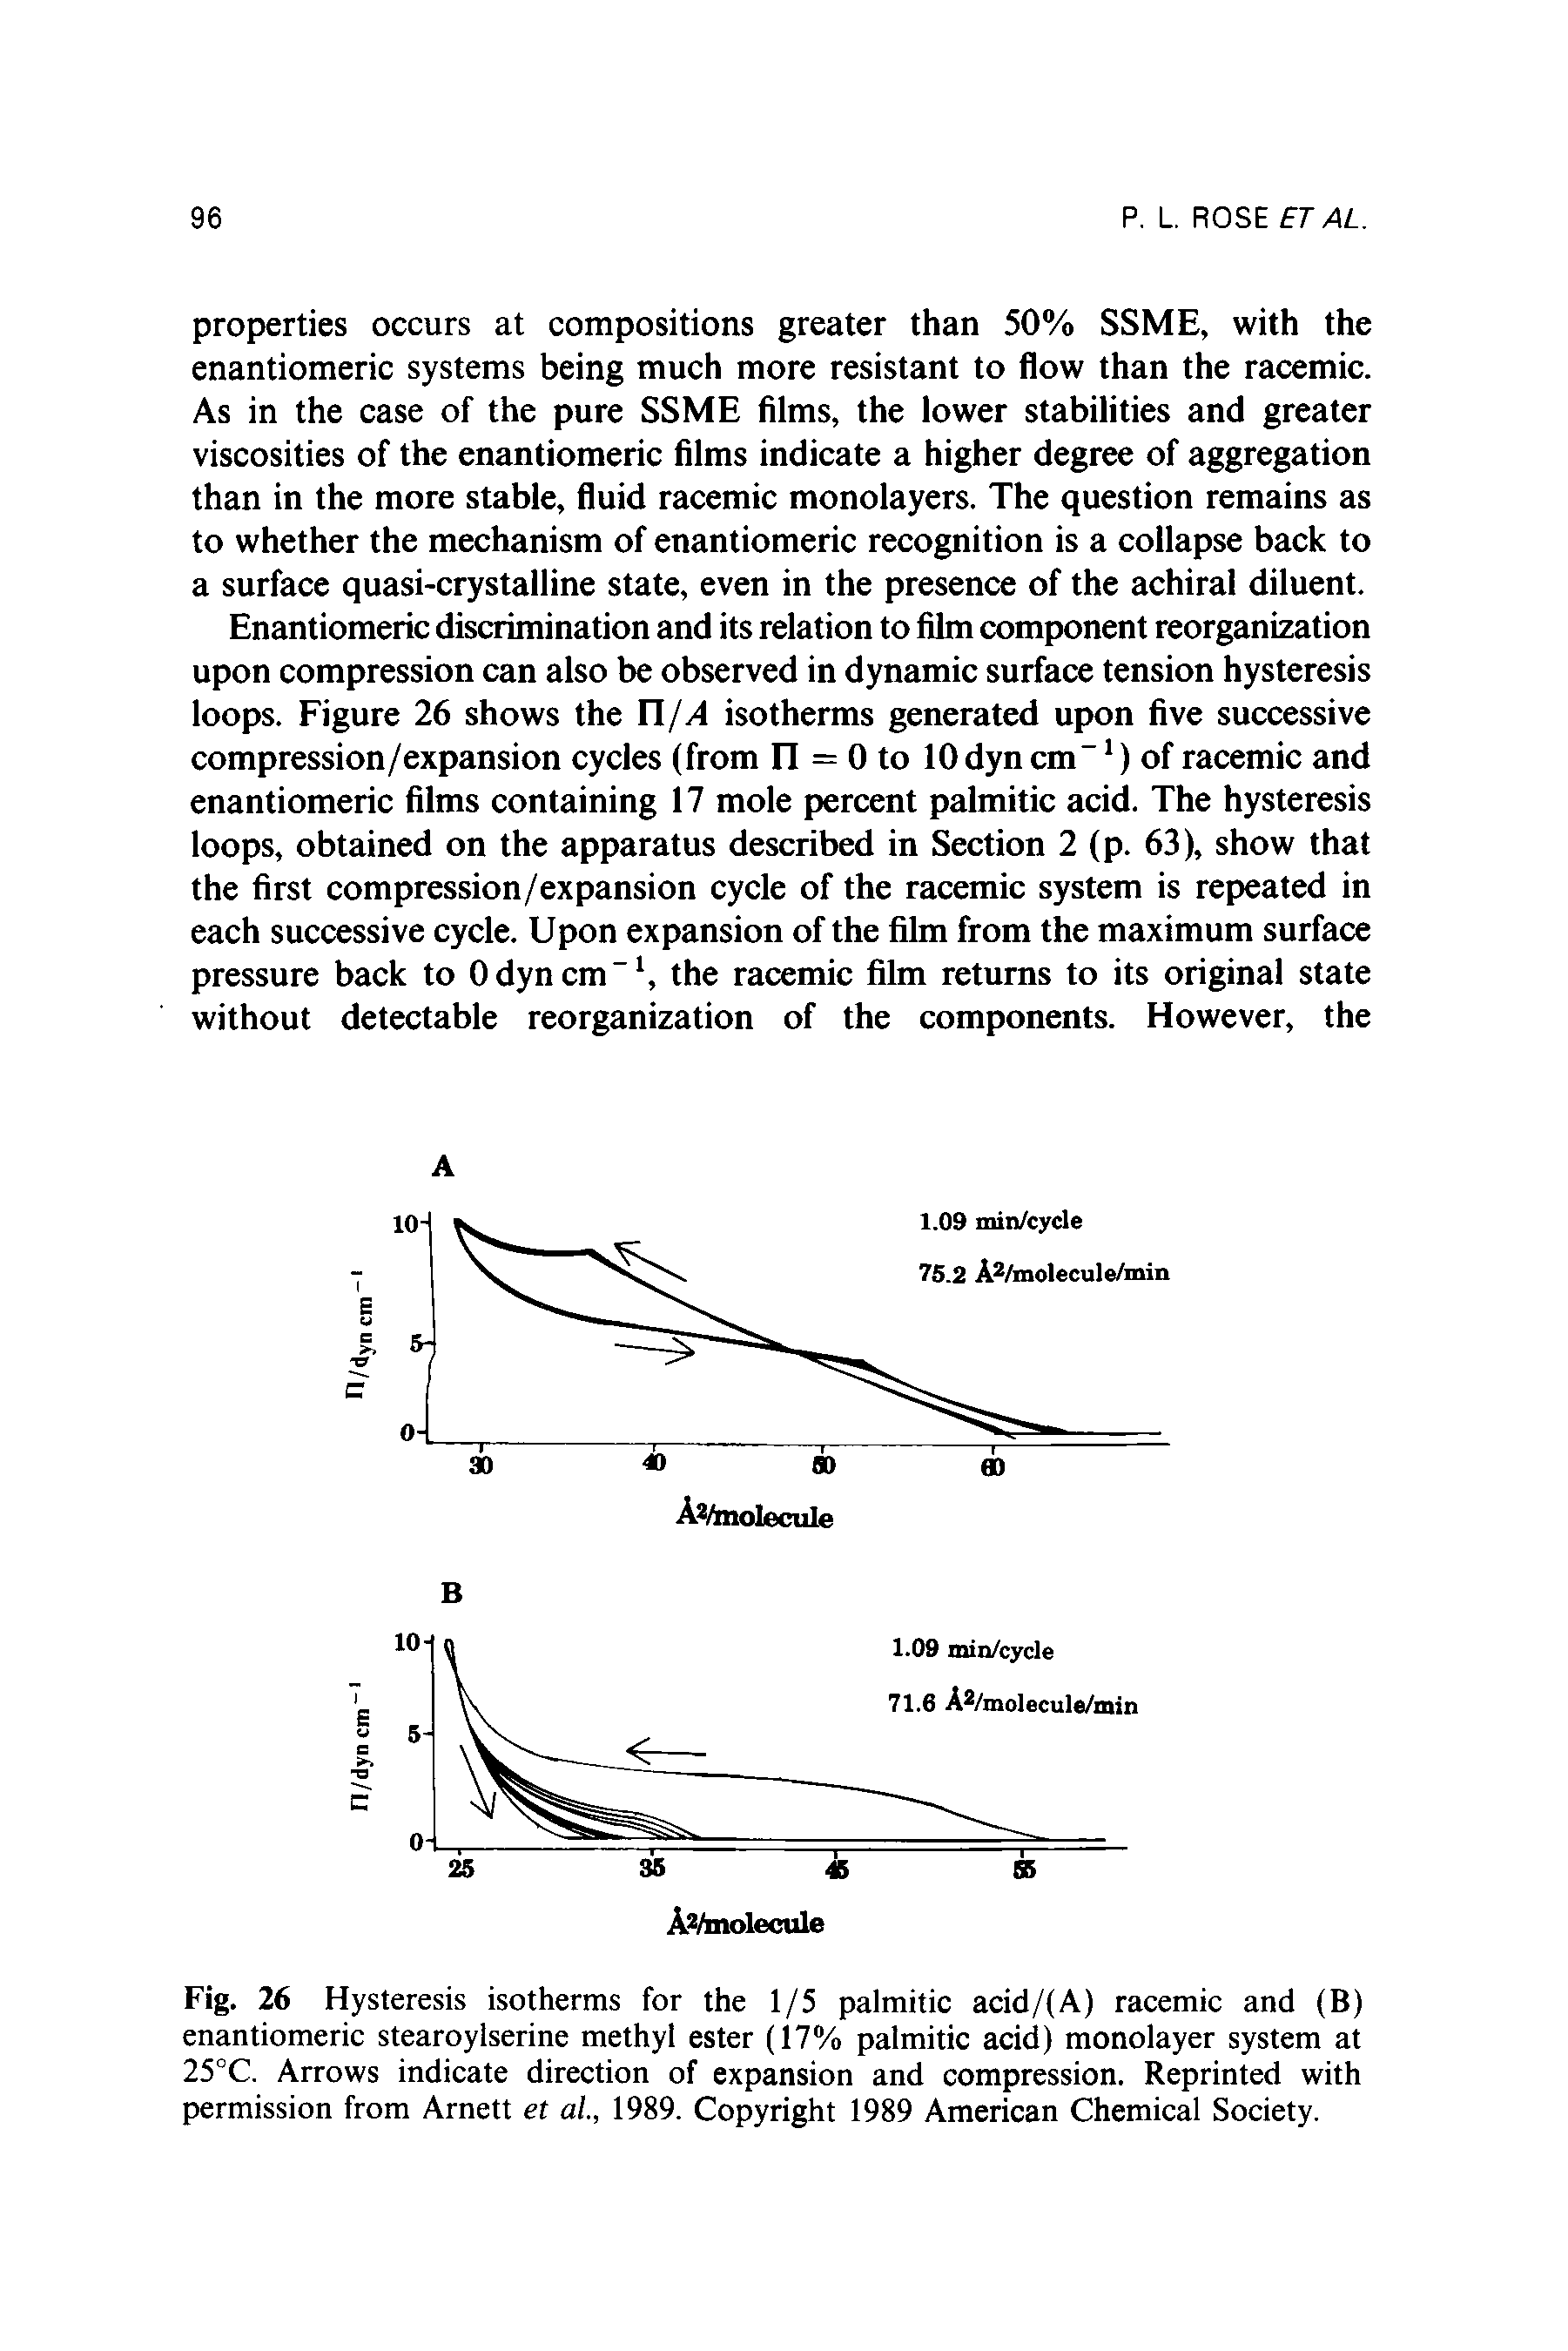 Fig. 26 Hysteresis isotherms for the 1/5 palmitic acid/(A) racemic and (B) enantiomeric stearoylserine methyl ester (17% palmitic acid) monolayer system at 25°C. Arrows indicate direction of expansion and compression. Reprinted with permission from Arnett et al., 1989. Copyright 1989 American Chemical Society.